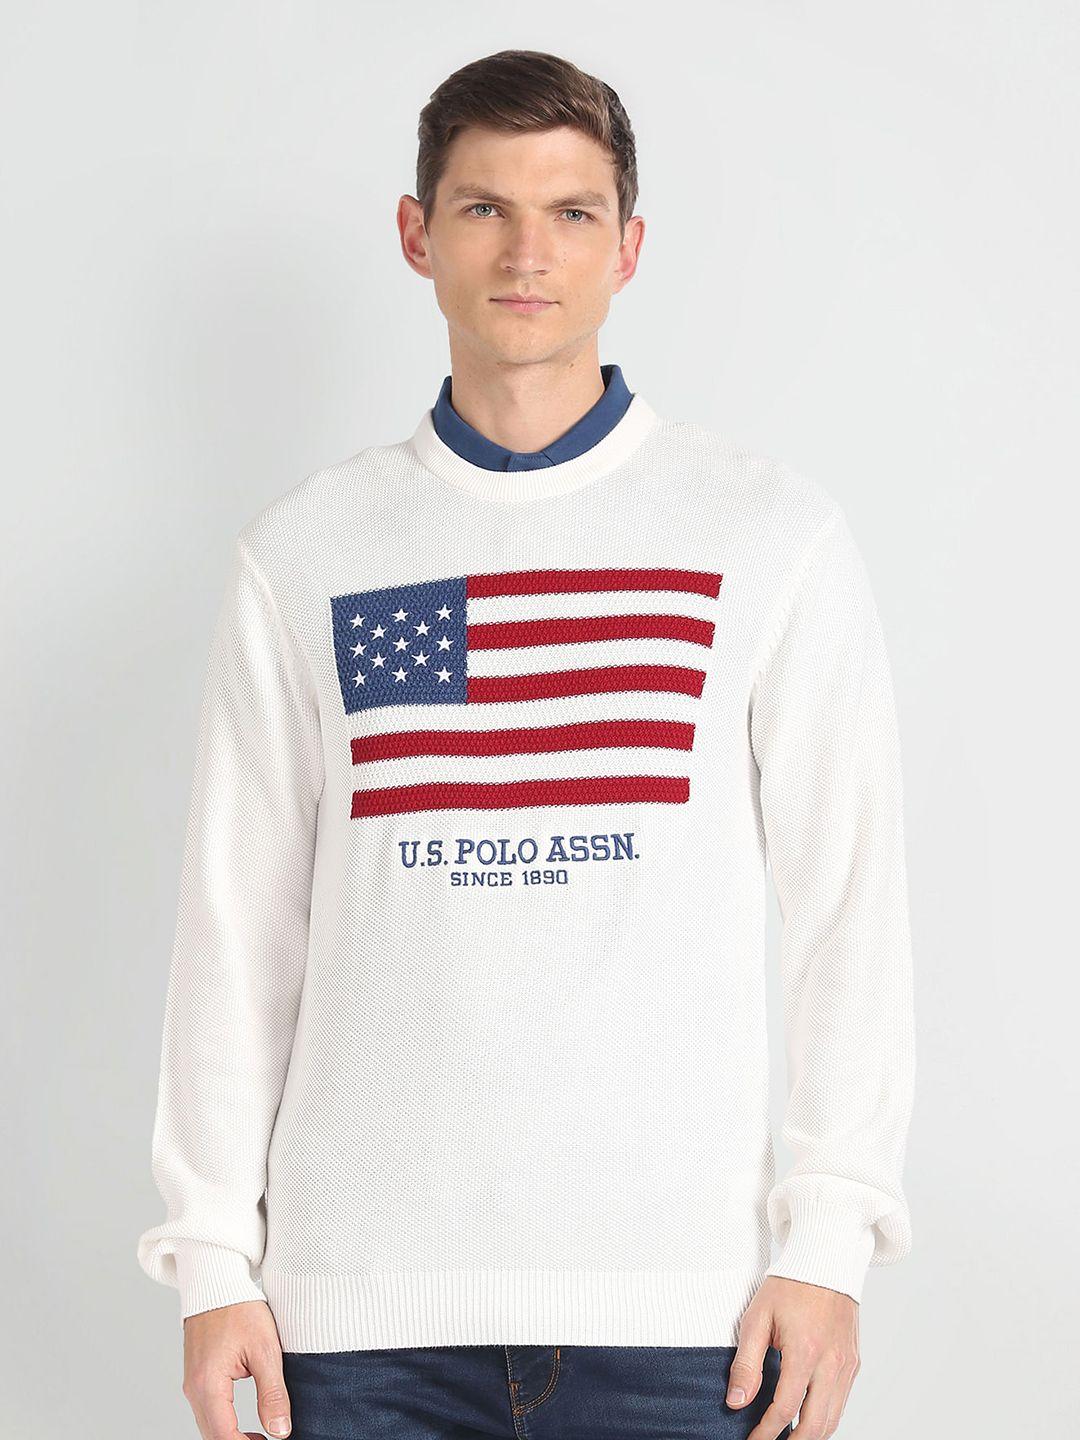 u.s.-polo-assn.-denim-co.-round-neck-embroidered-pullover